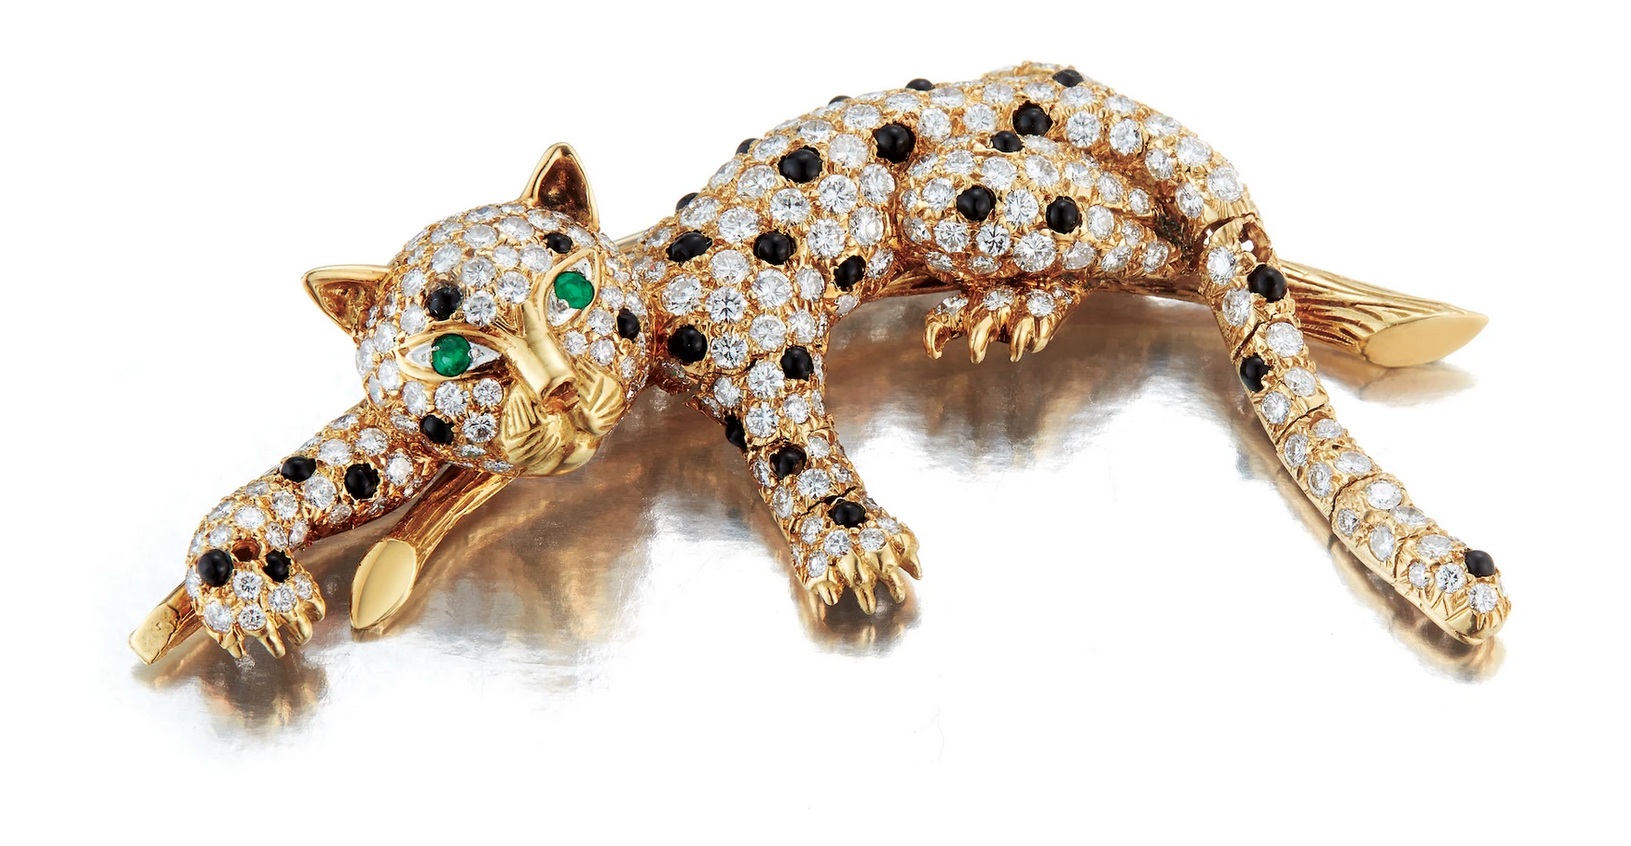 Cat brooch with diamonds and onyx on body, and emeralds for eyes